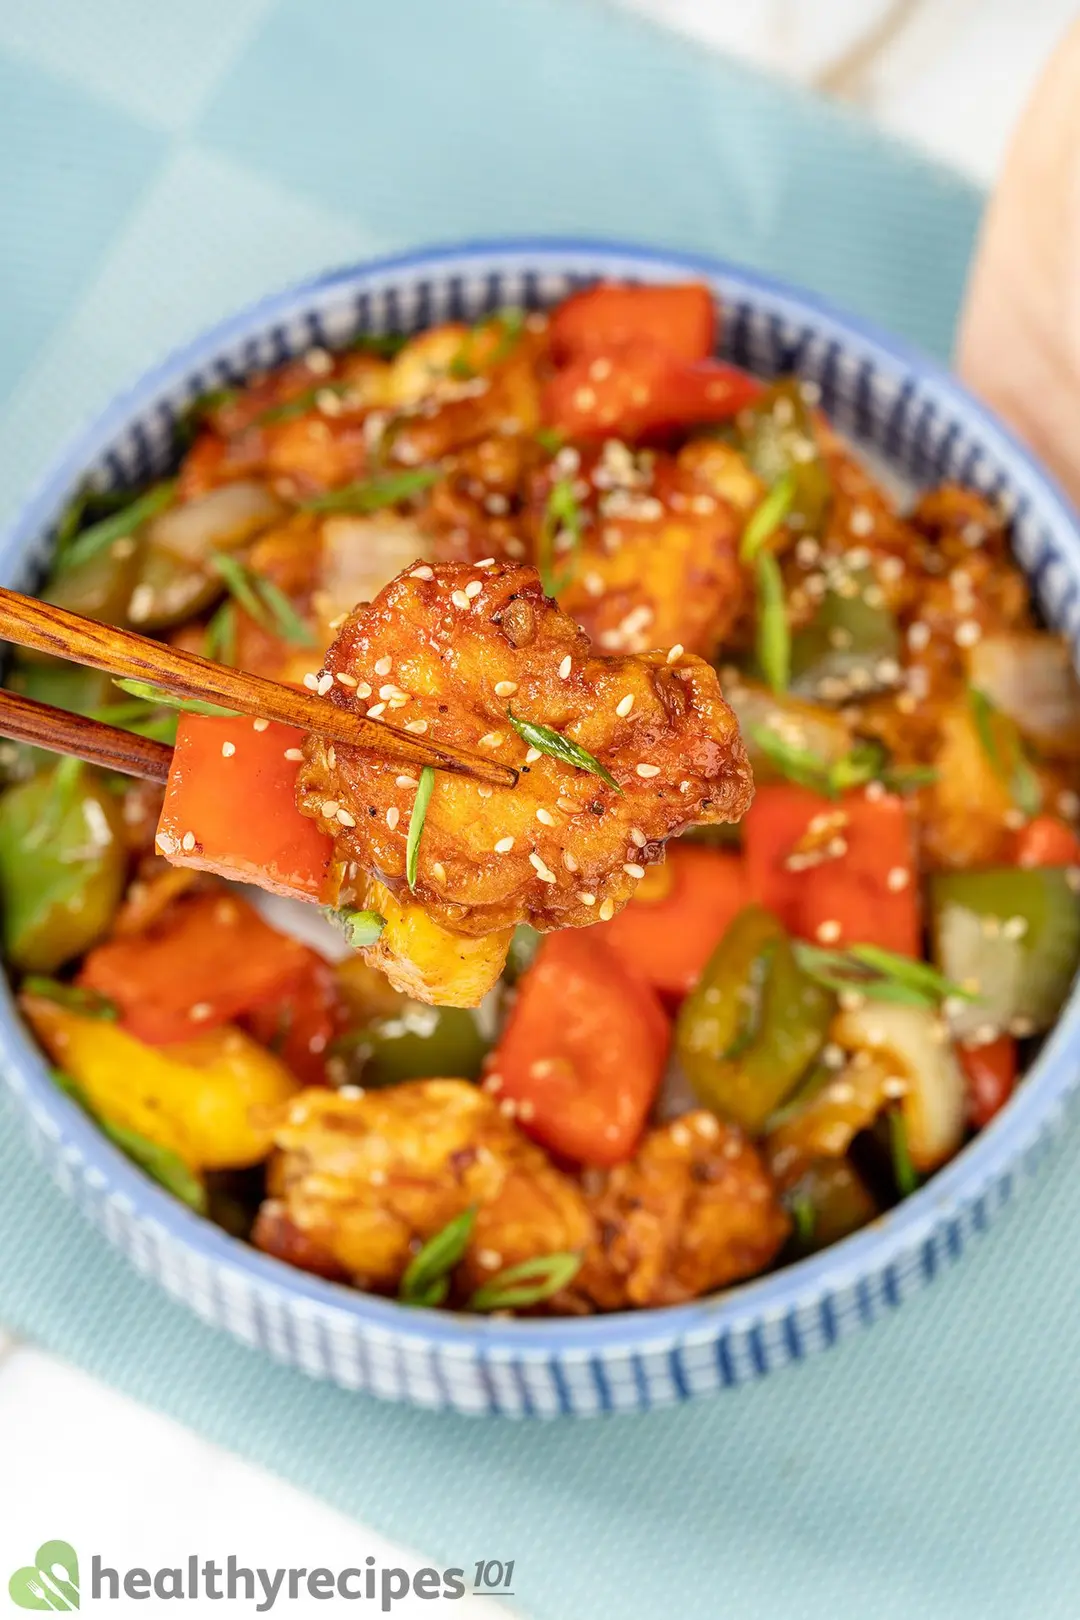 A blue-checkered bowl of battered shrimp sauteed with colorful vegetables, put next to a wooden pair of chopsticks